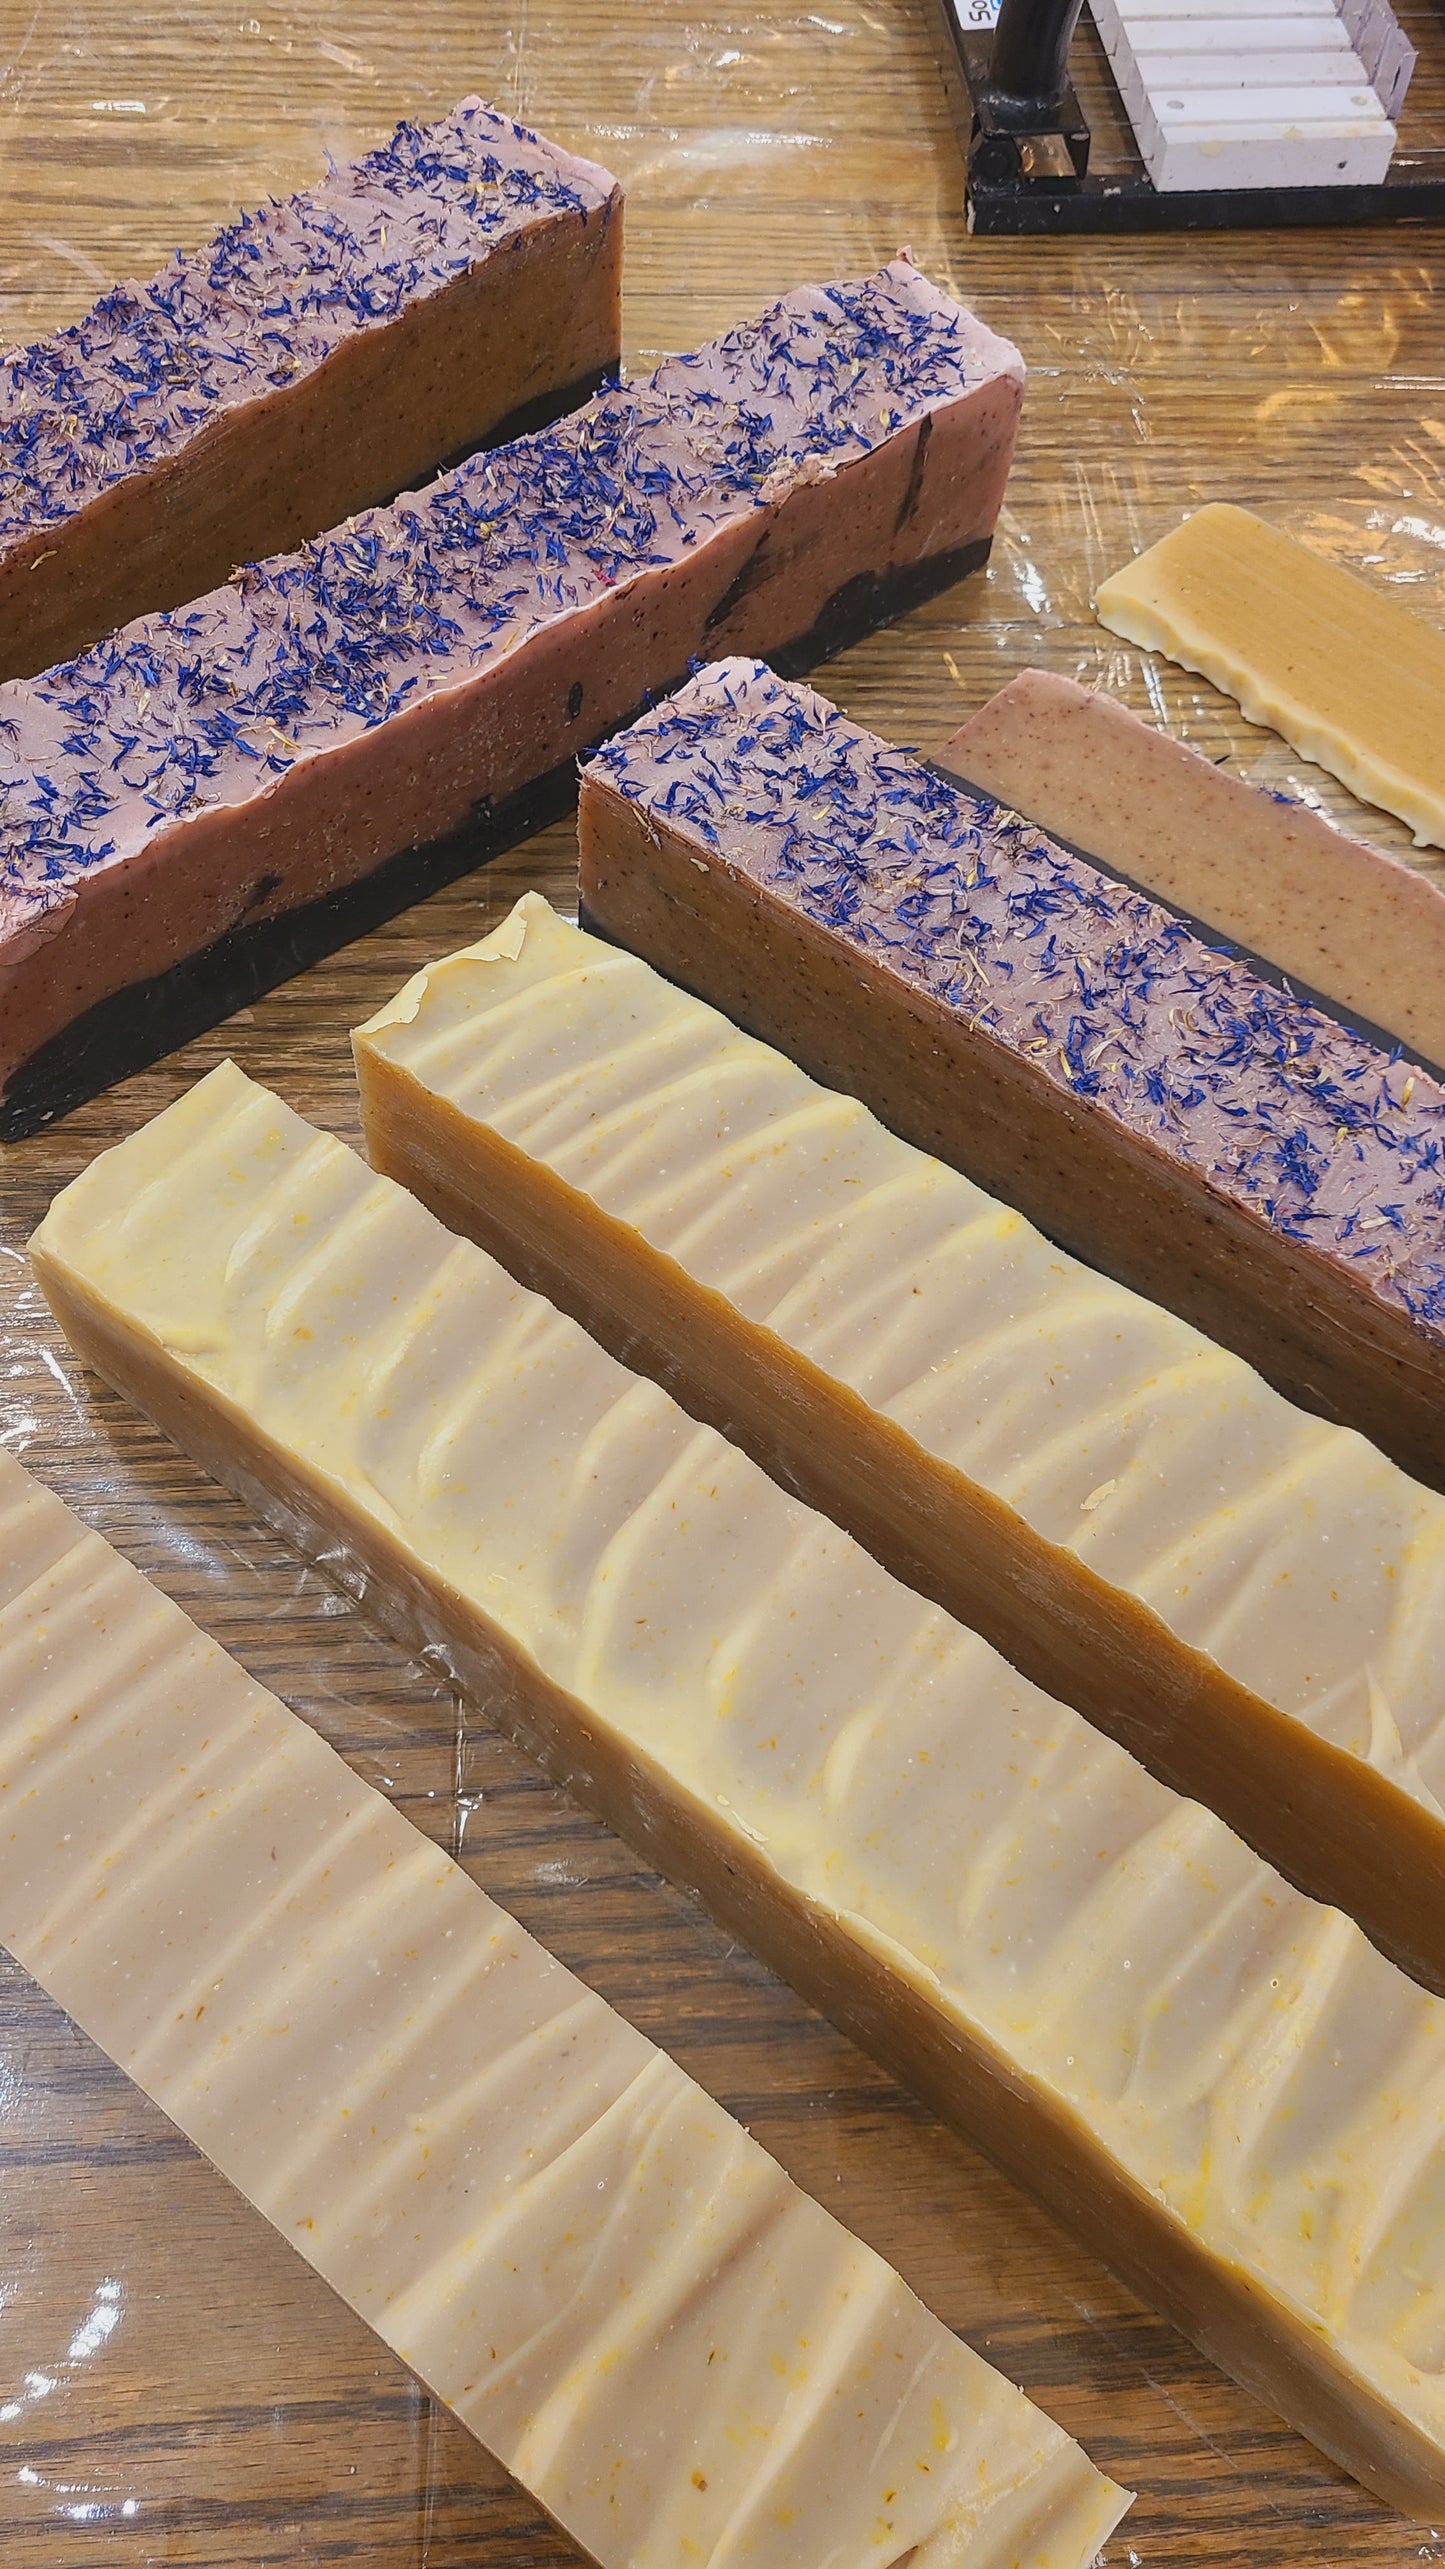 Soap making class (our next one is May 24)